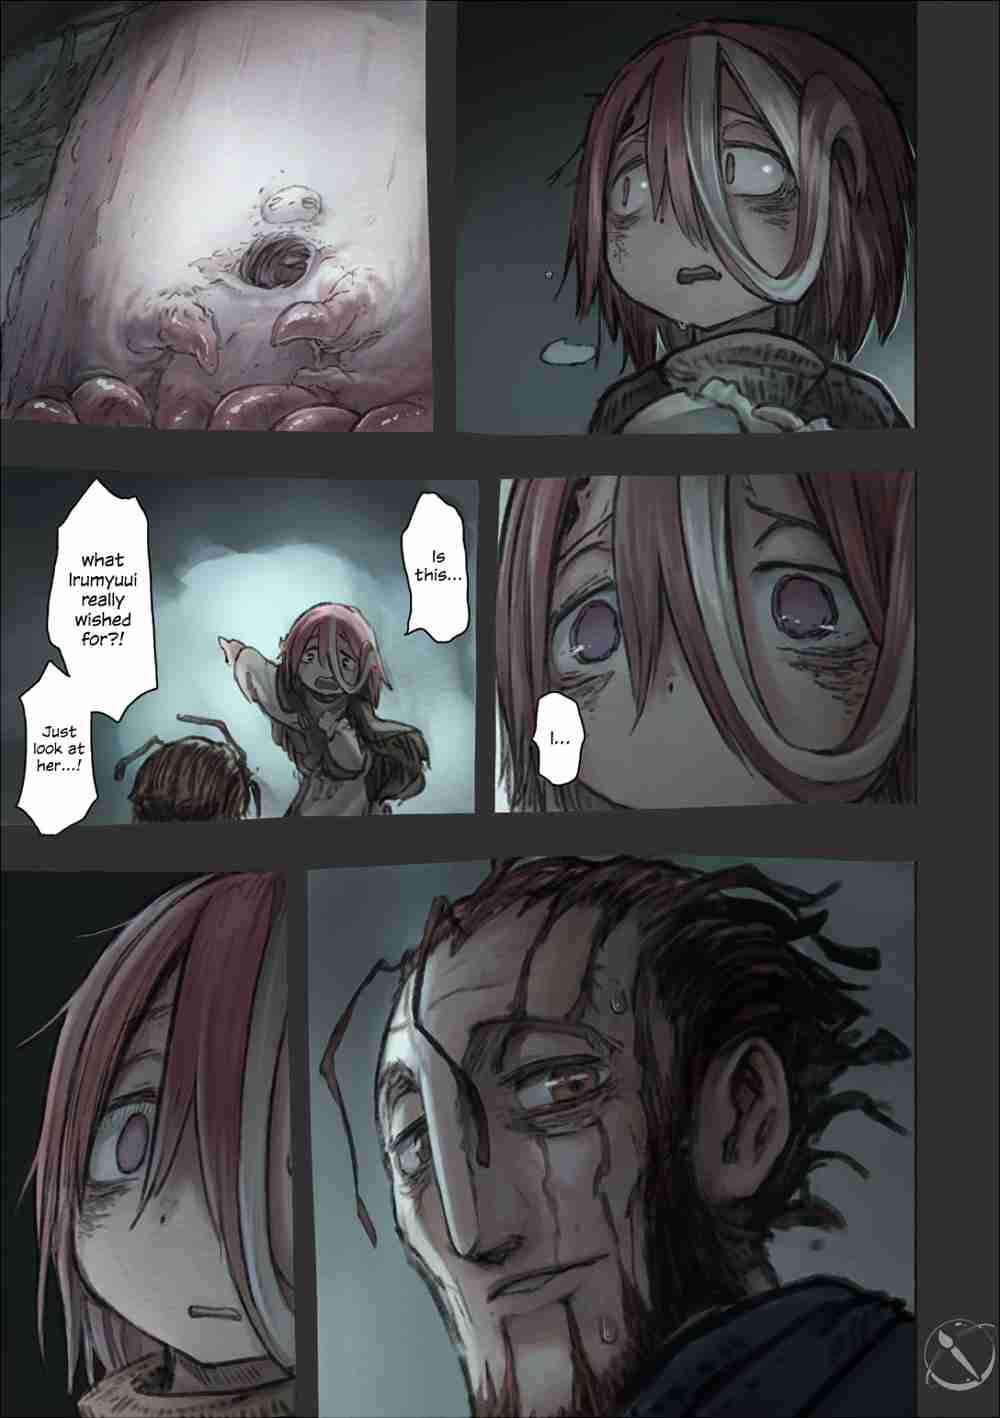 Made in Abyss (Fan Colored) Vol. 8 Ch. 51 The Wish's Form